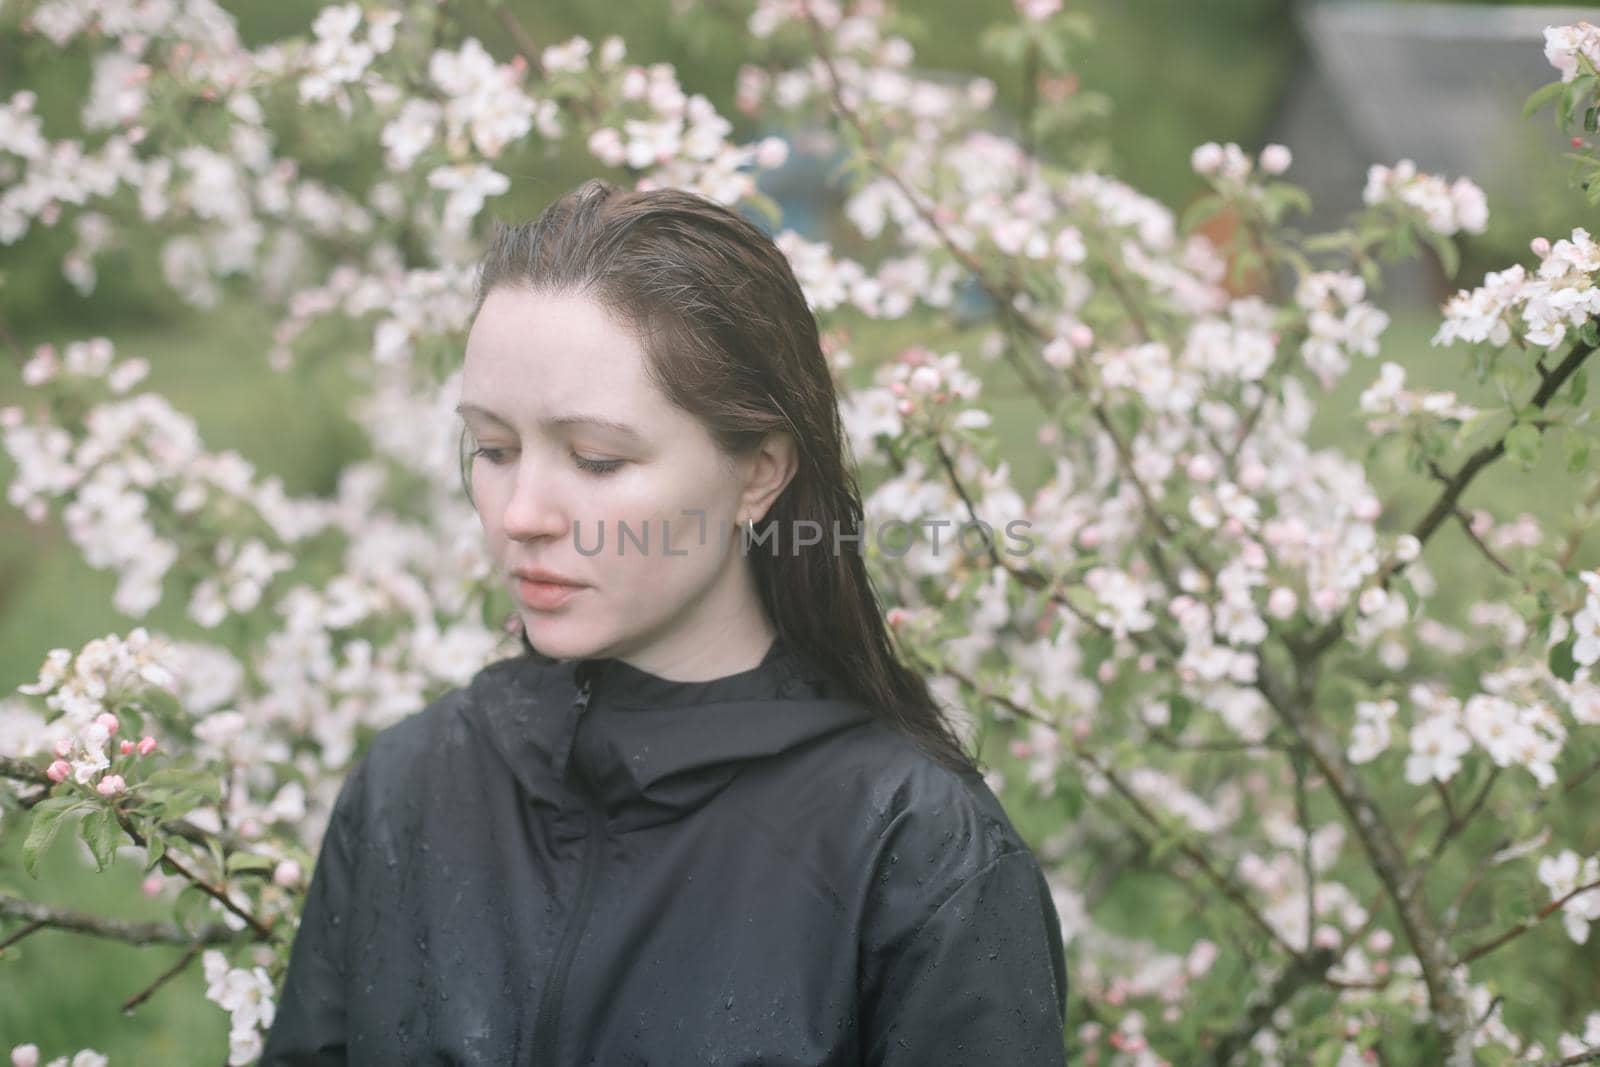 emotional portrait of a young woman standing alone under rain outdoors in spring